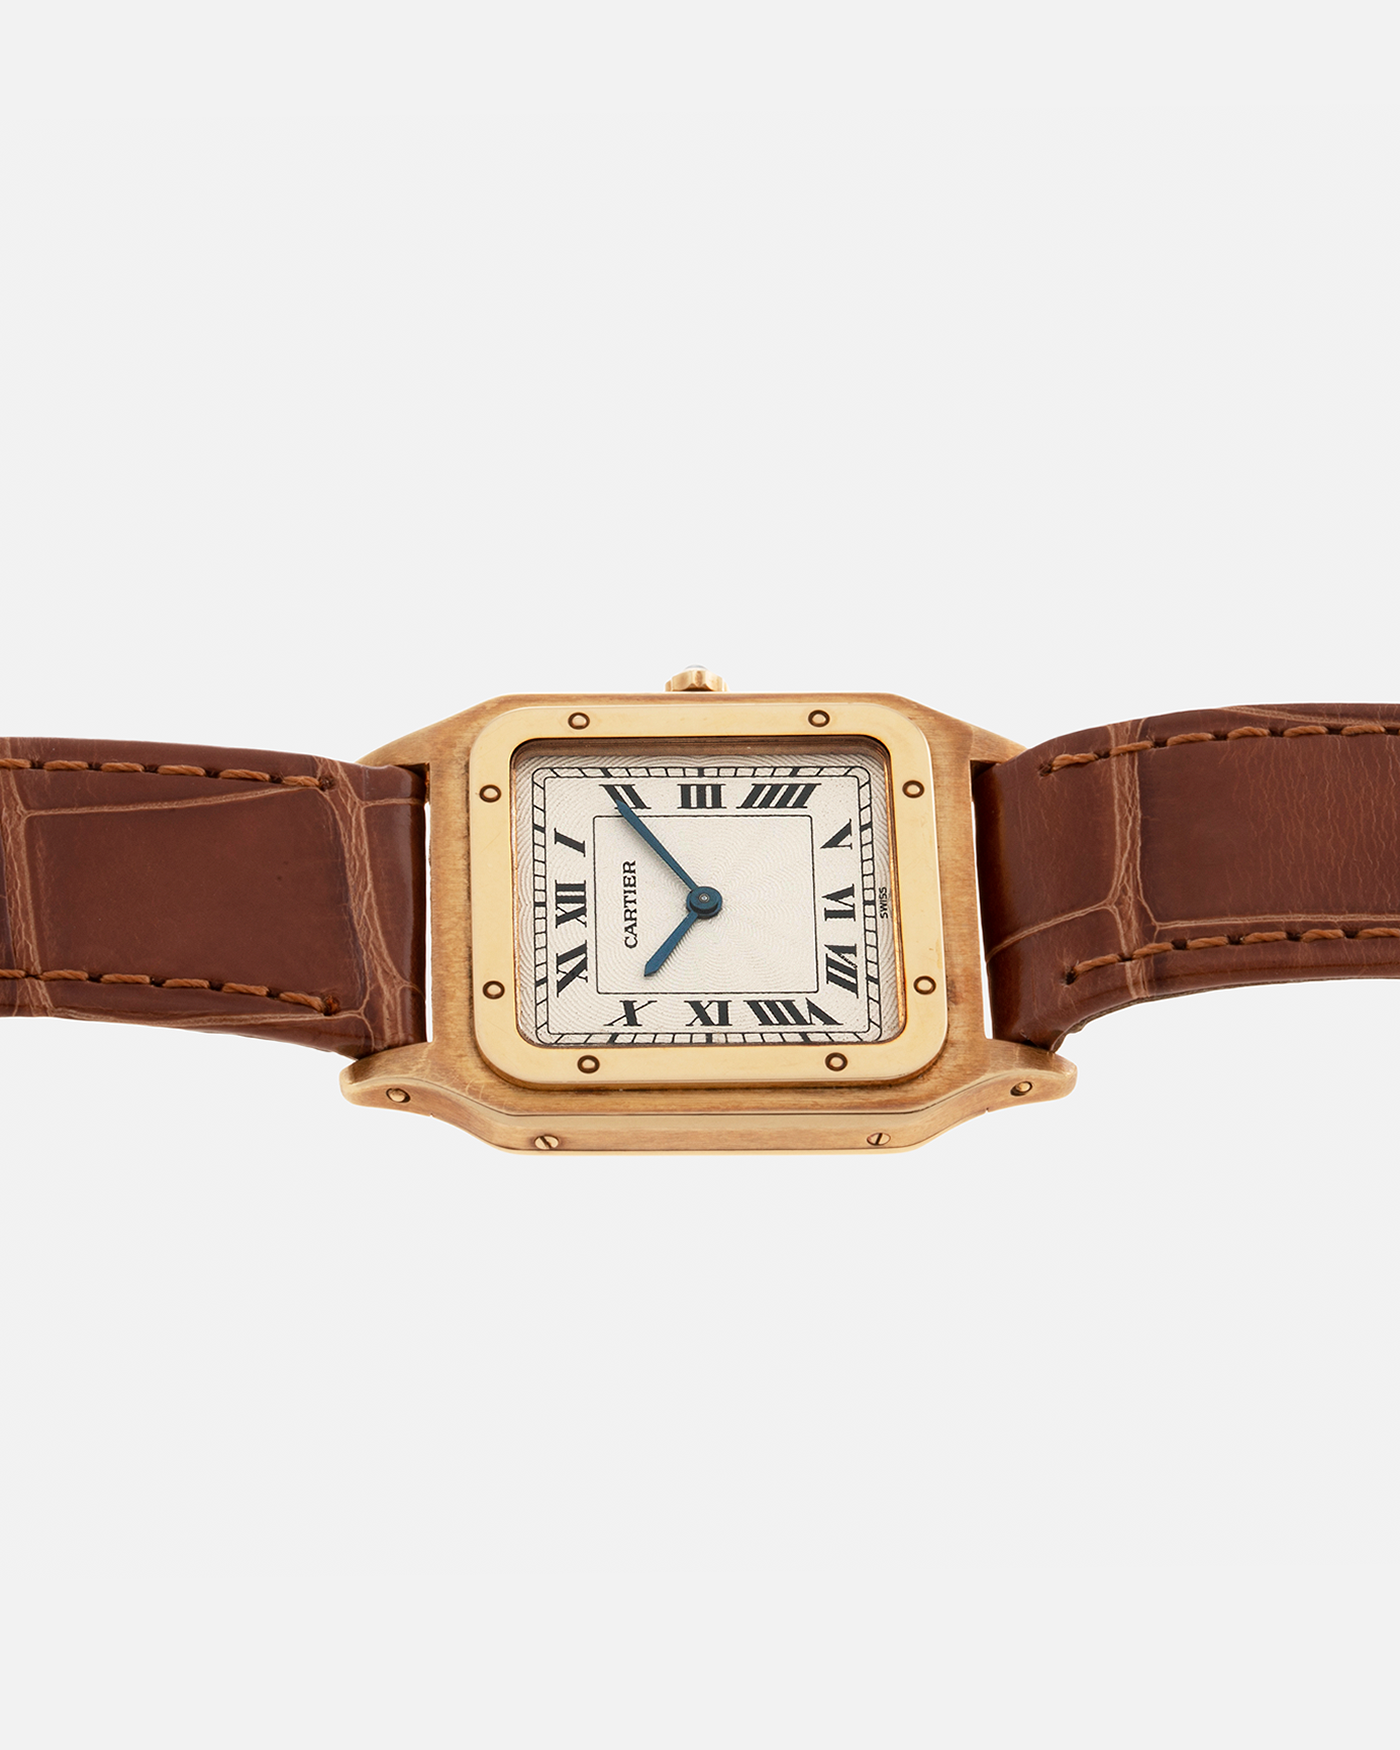 Brand: Cartier Year: 1990s Model: Santos-Dumont Reference: 1576 Material: 18-carat Yellow Gold Movement: Cartier Cal. 021 MC (Frédéric Piguet Cal. 21 based), Manual-Winding Case Diameter: 27mm Lug Width: 18mm Strap: Cartier Light Brown Alligator Leather Strap with Signed 18-carat Yellow Gold Tang Buckle